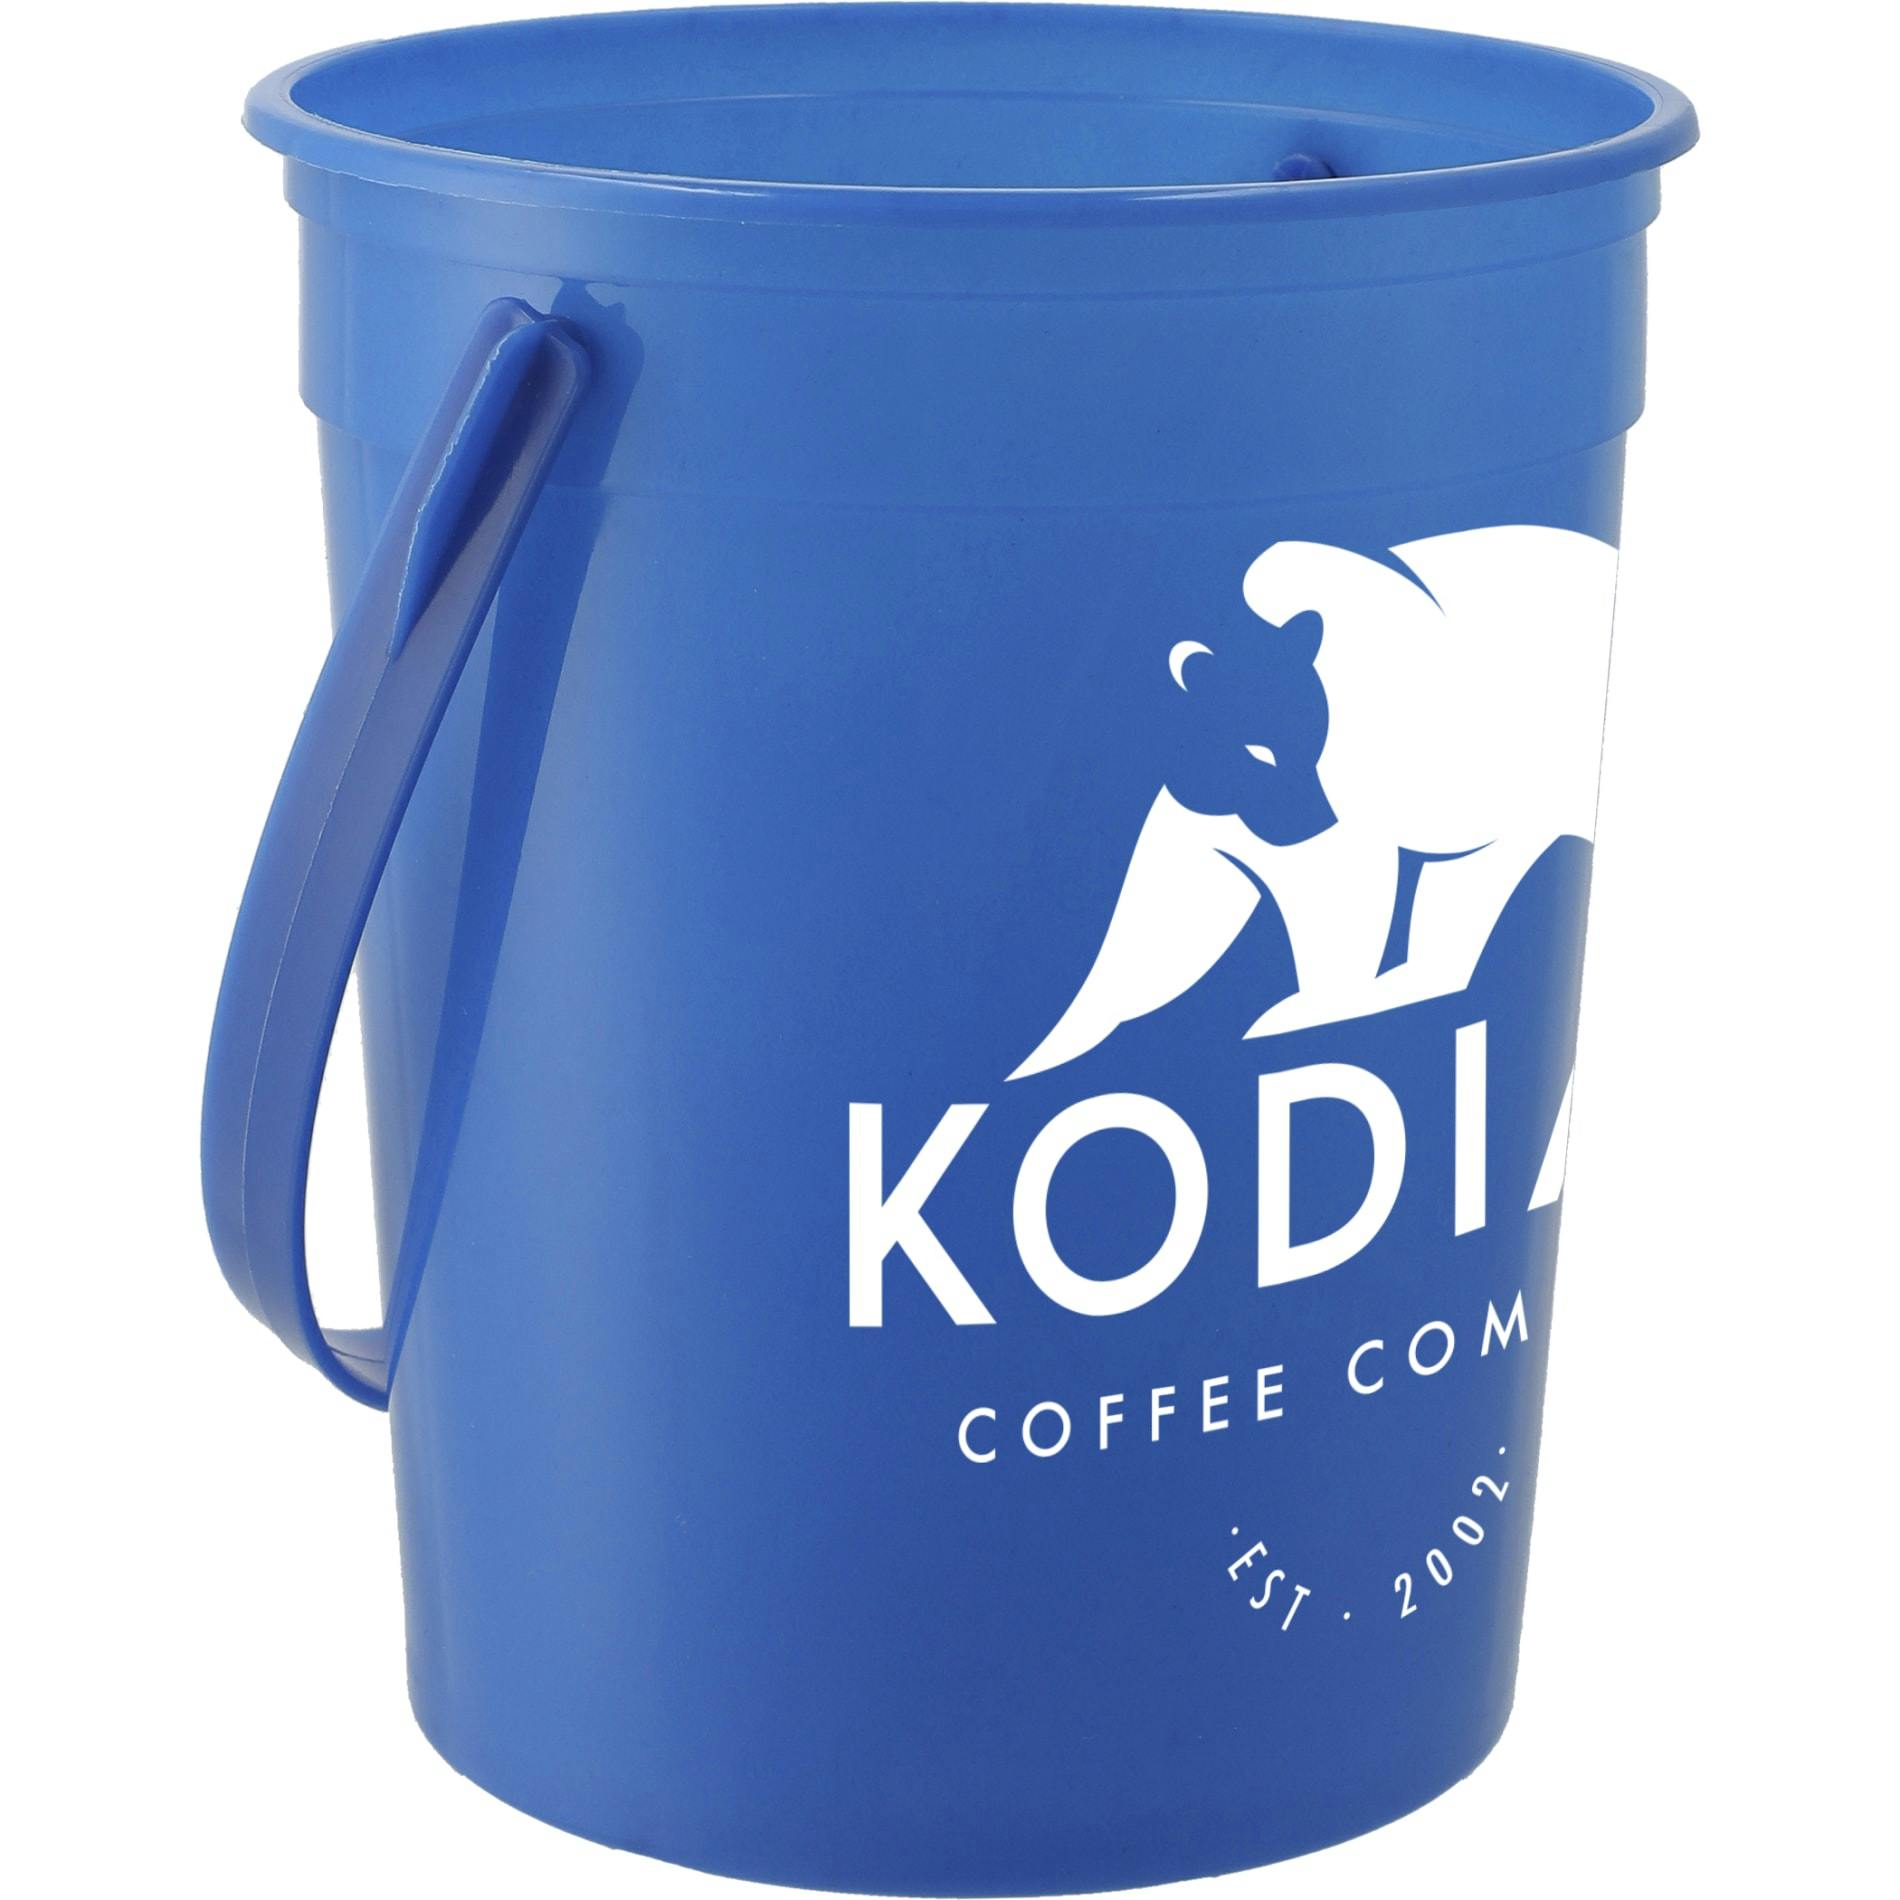 32oz Pail with Handle - additional Image 1